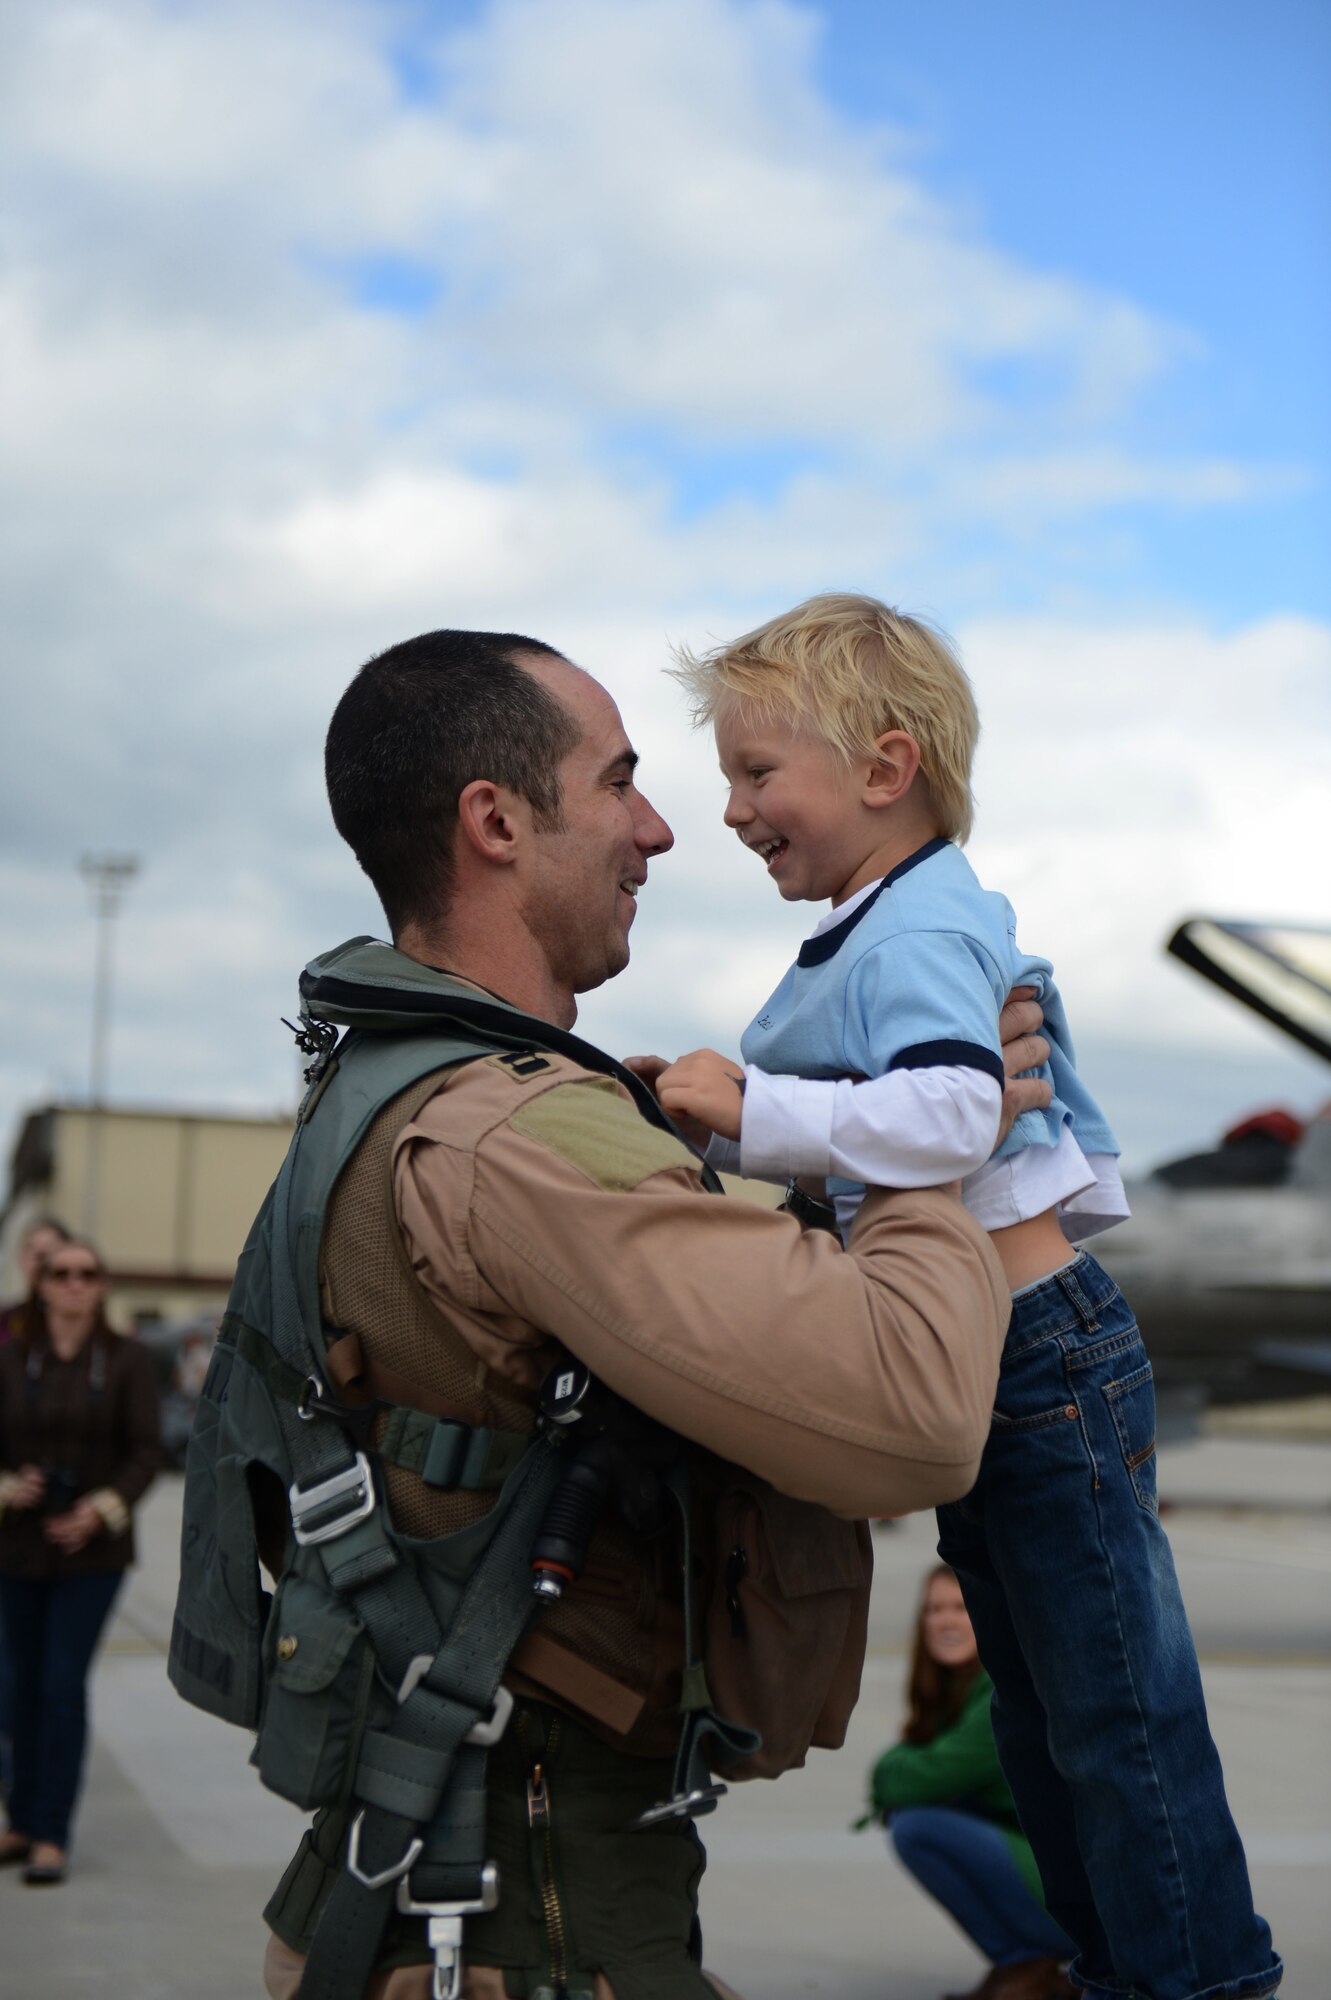 SPANGDAHLEM AIR BASE, Germany – U.S. Air Force Capt. Lance Ferguson, 480th Fighter Squadron pilot from Adrian, Mich., celebrates with his son, Liam during a deployment homecoming Sept 15, 2013. The 480th FS maintains ready forces to conduct a full range of operations in real-world scenarios. (U.S. Air Force photo by Airman 1st Class Gustavo Castillo/Released)